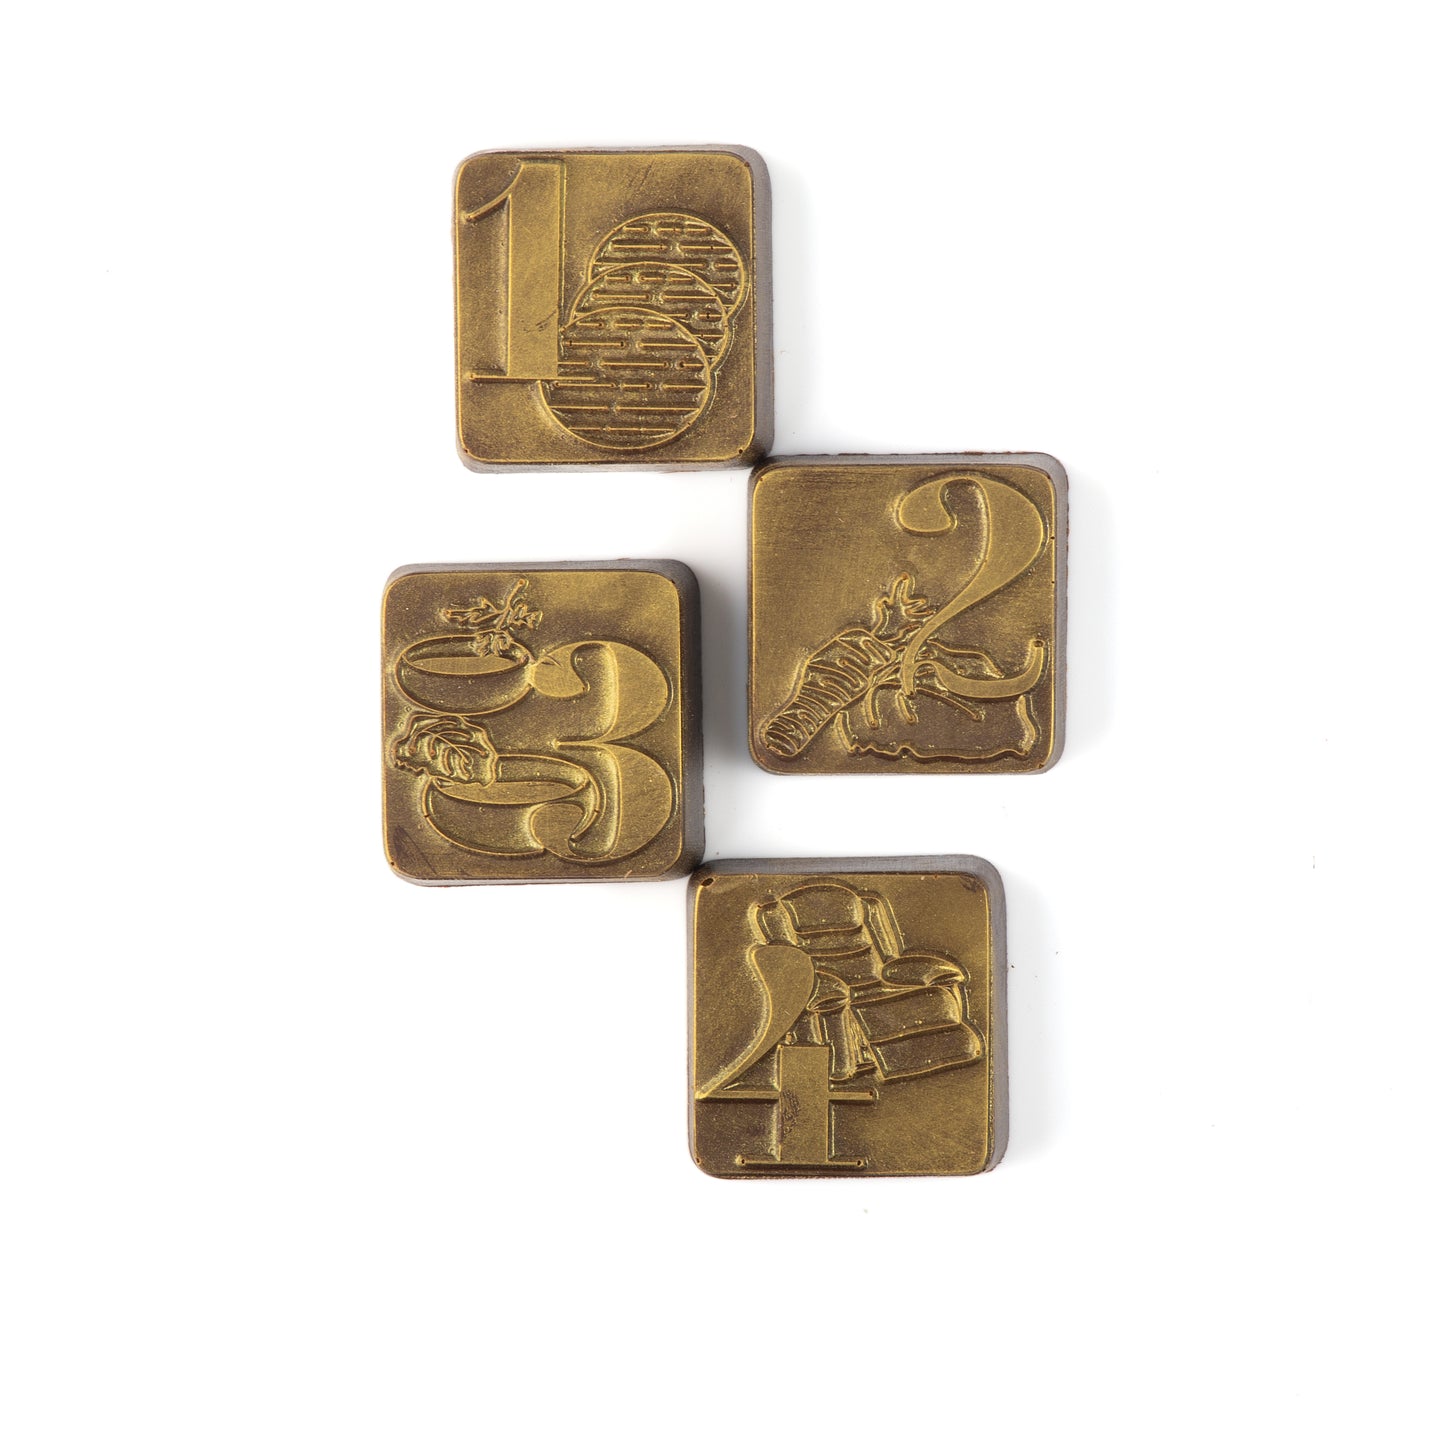 Complete Chocolate Seder Set | Kosher for Passover